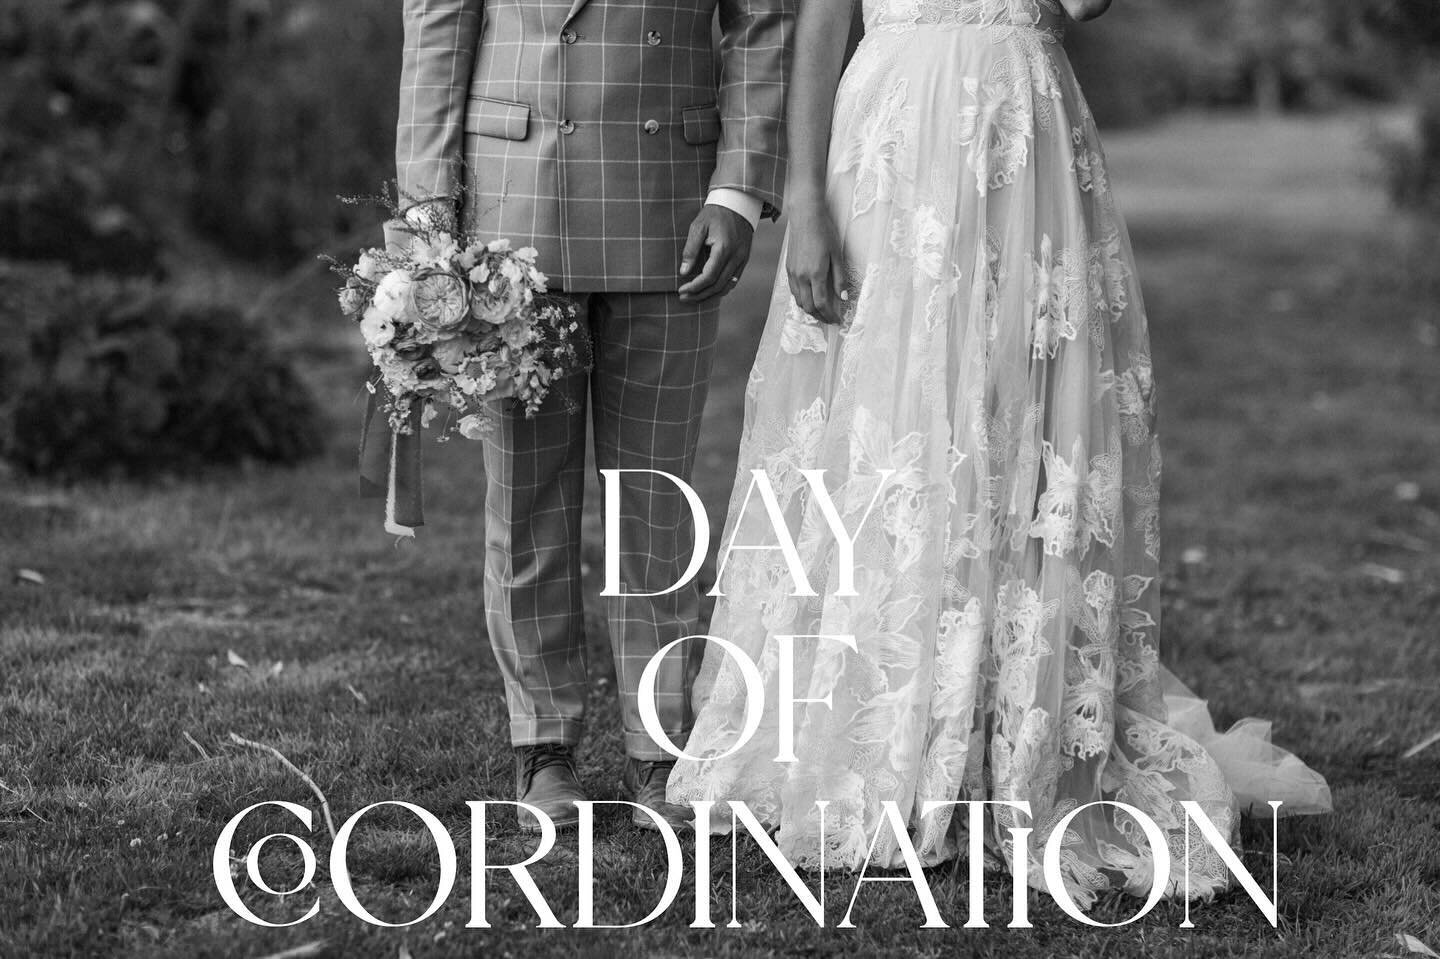 What does Day of Coordination mean? 
Generally when you hire a &ldquo;day of coordinator&rdquo; they don&rsquo;t just work the day of the wedding and show up asking what the plan is. Some will start months ahead with small chats with the couple or a 